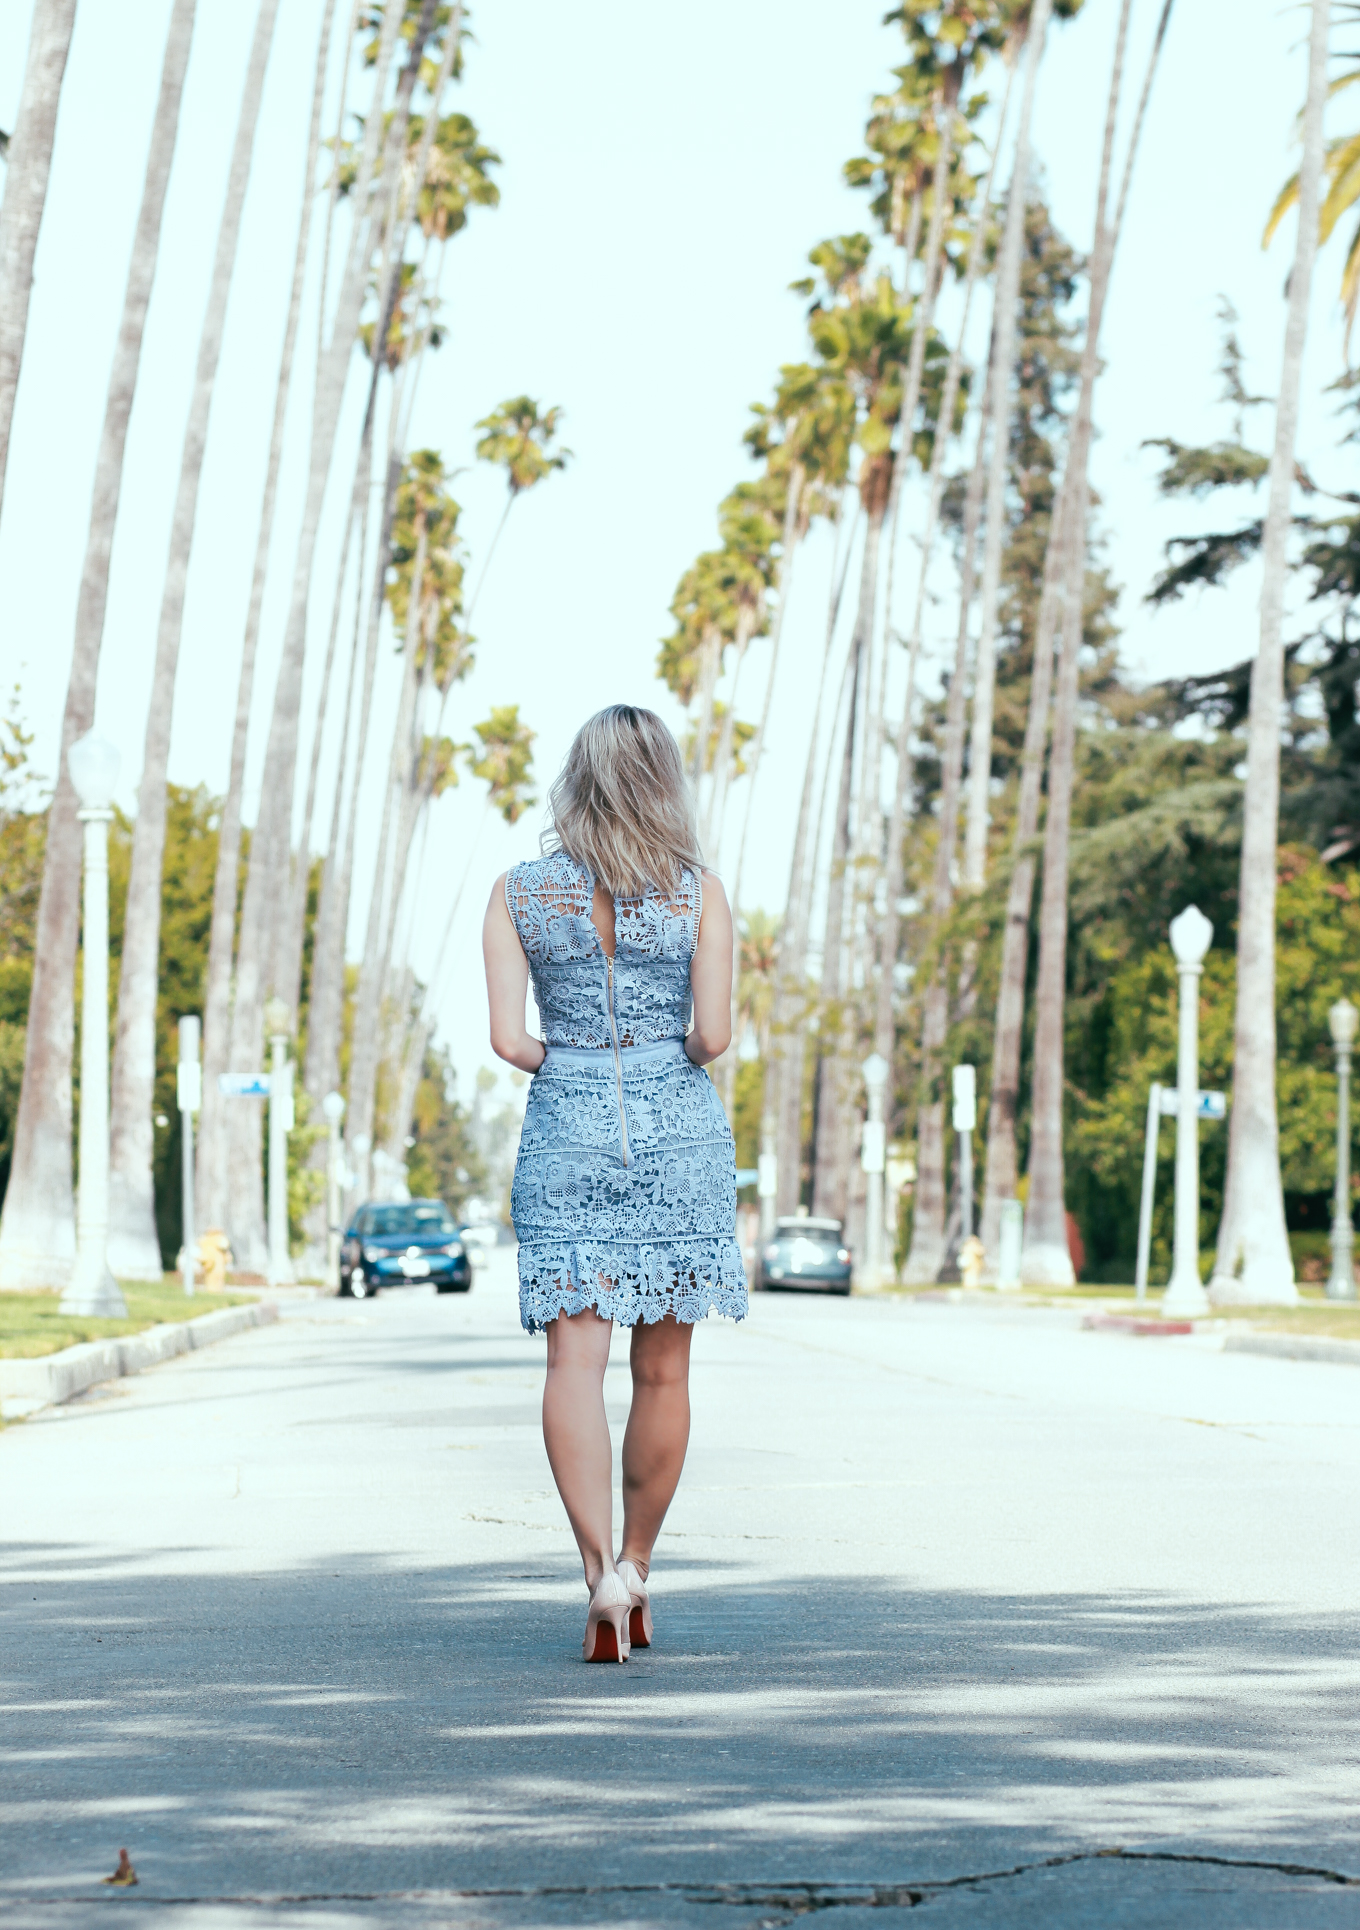 Blondie in the City | Baby Blue Lace A-Line Dress | Street of Palm Tress in LA